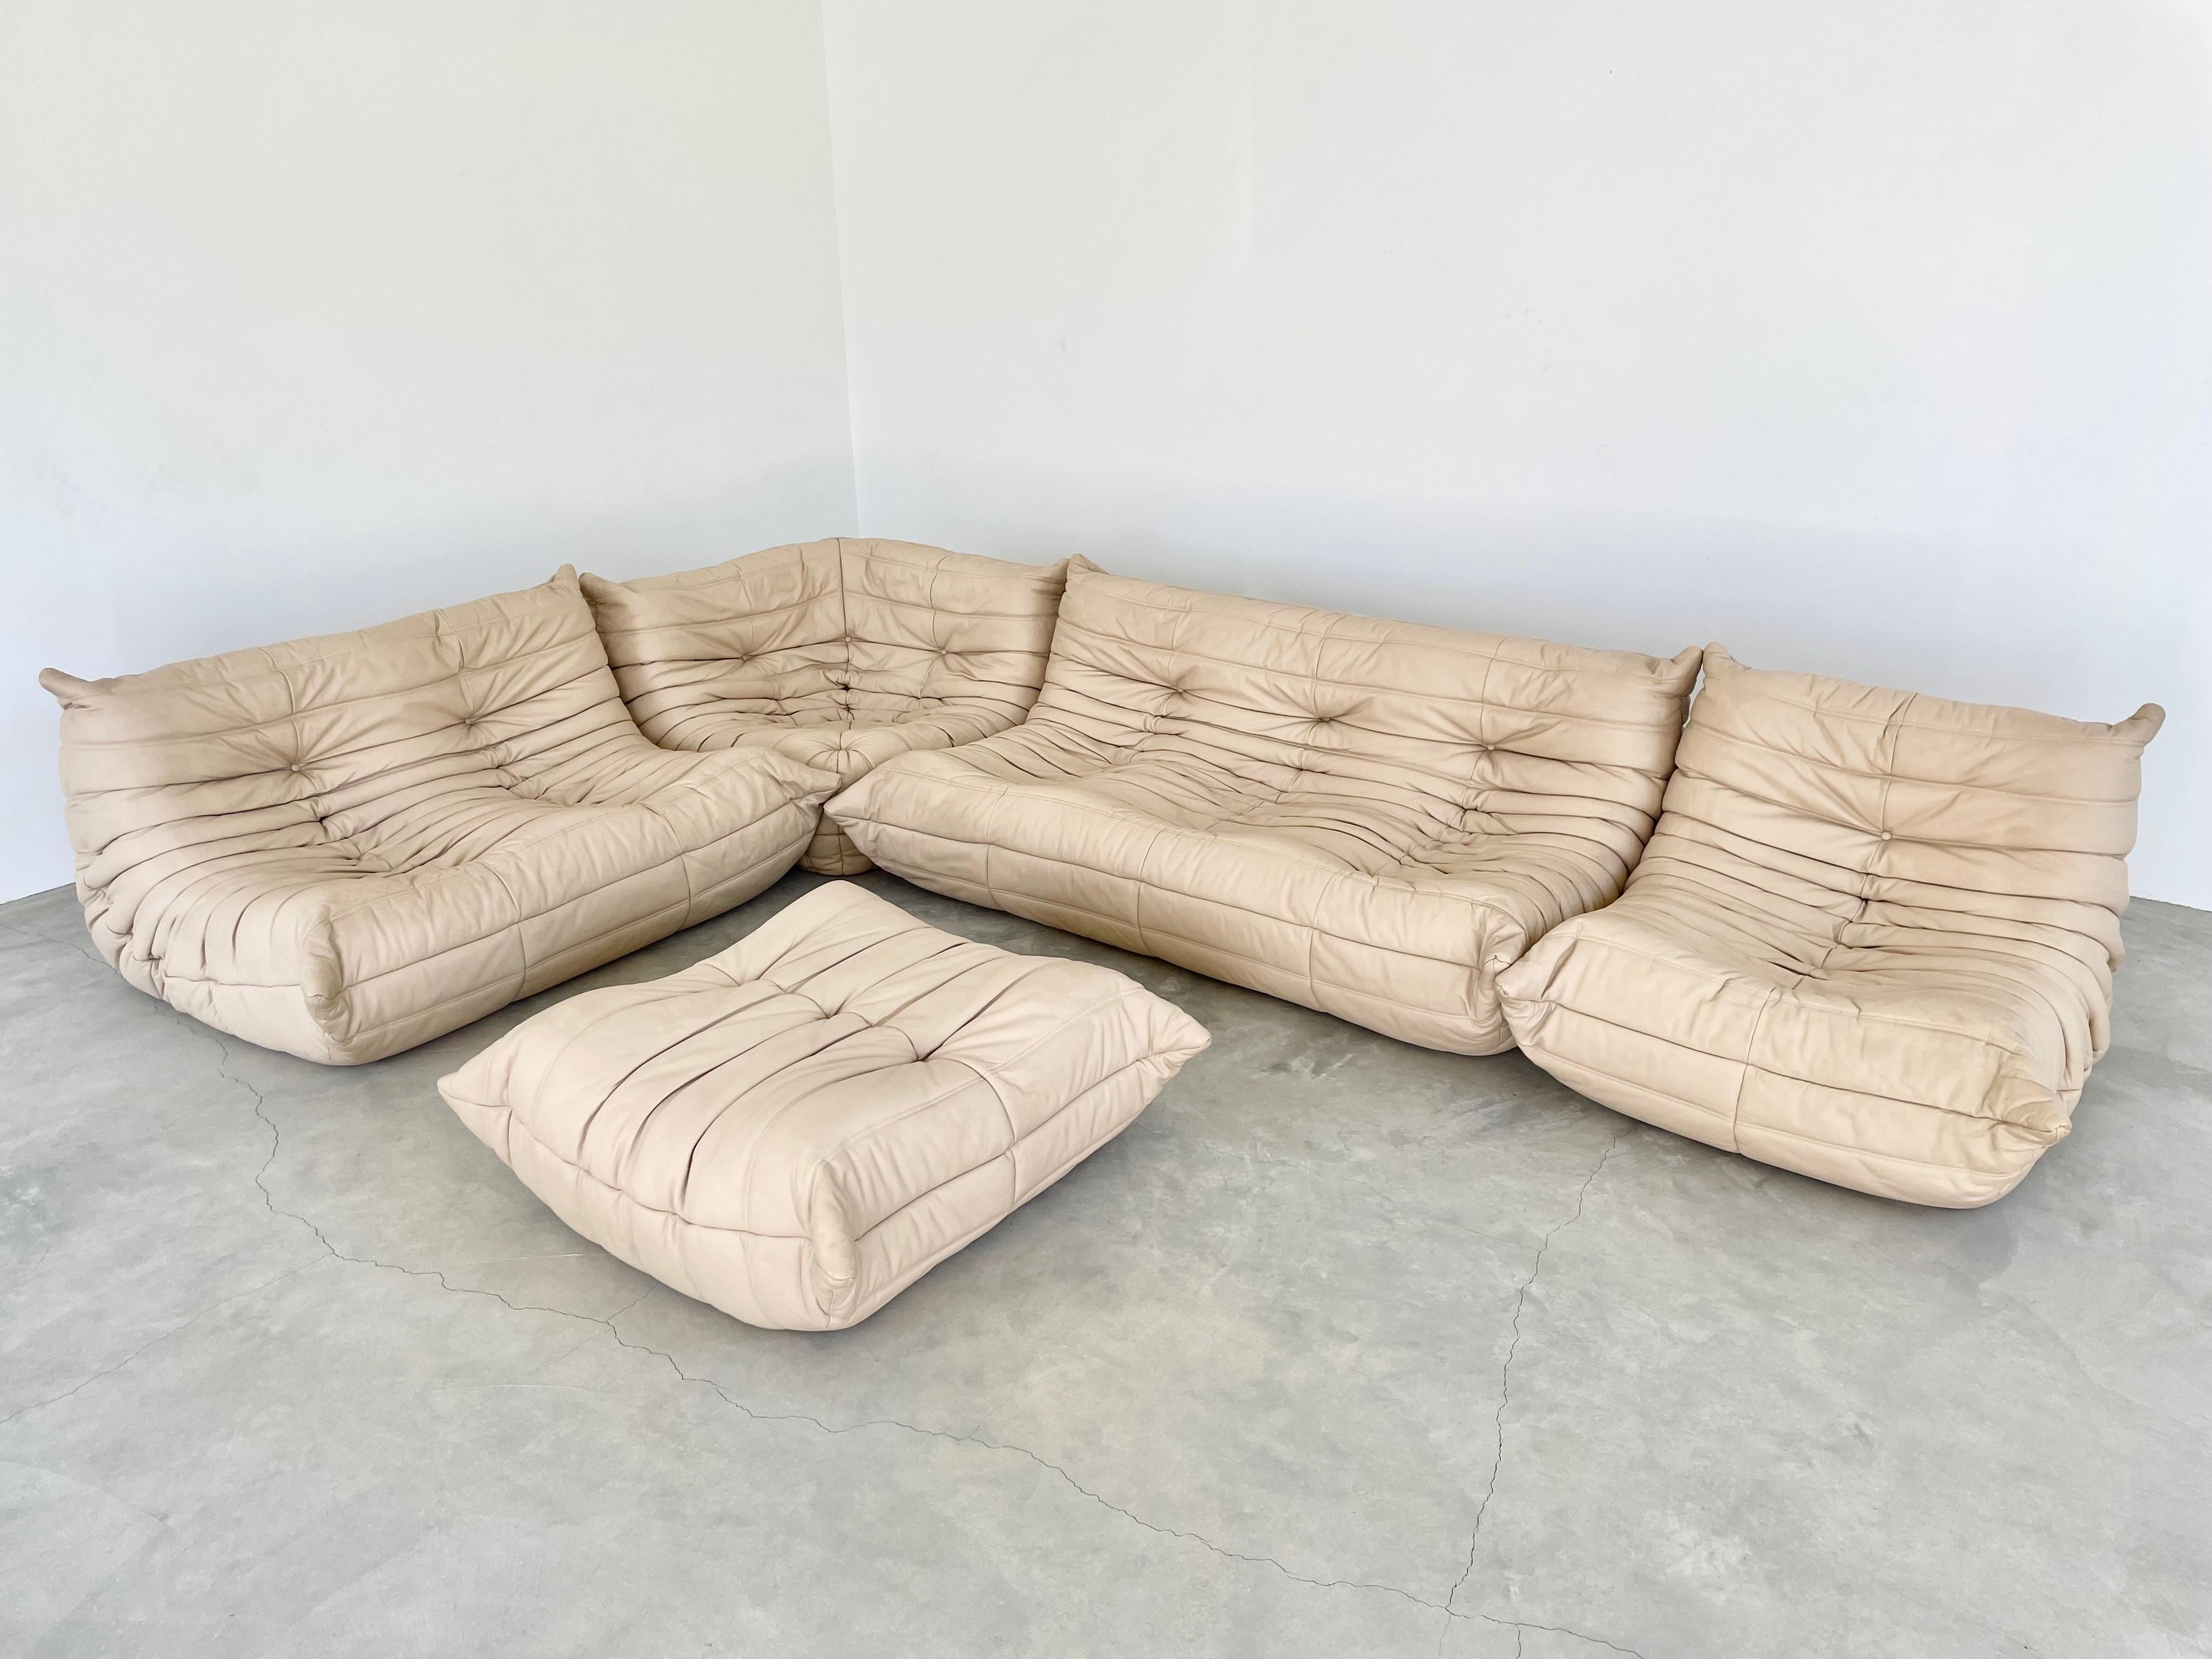 Classic French Togo set by Michel Ducaroy for luxury brand Ligne Roset. Originally designed in the 1970s the iconic togo sofa is now a design classic. This set comes in its original beige leather.

Timeless comfort and style make this monumental